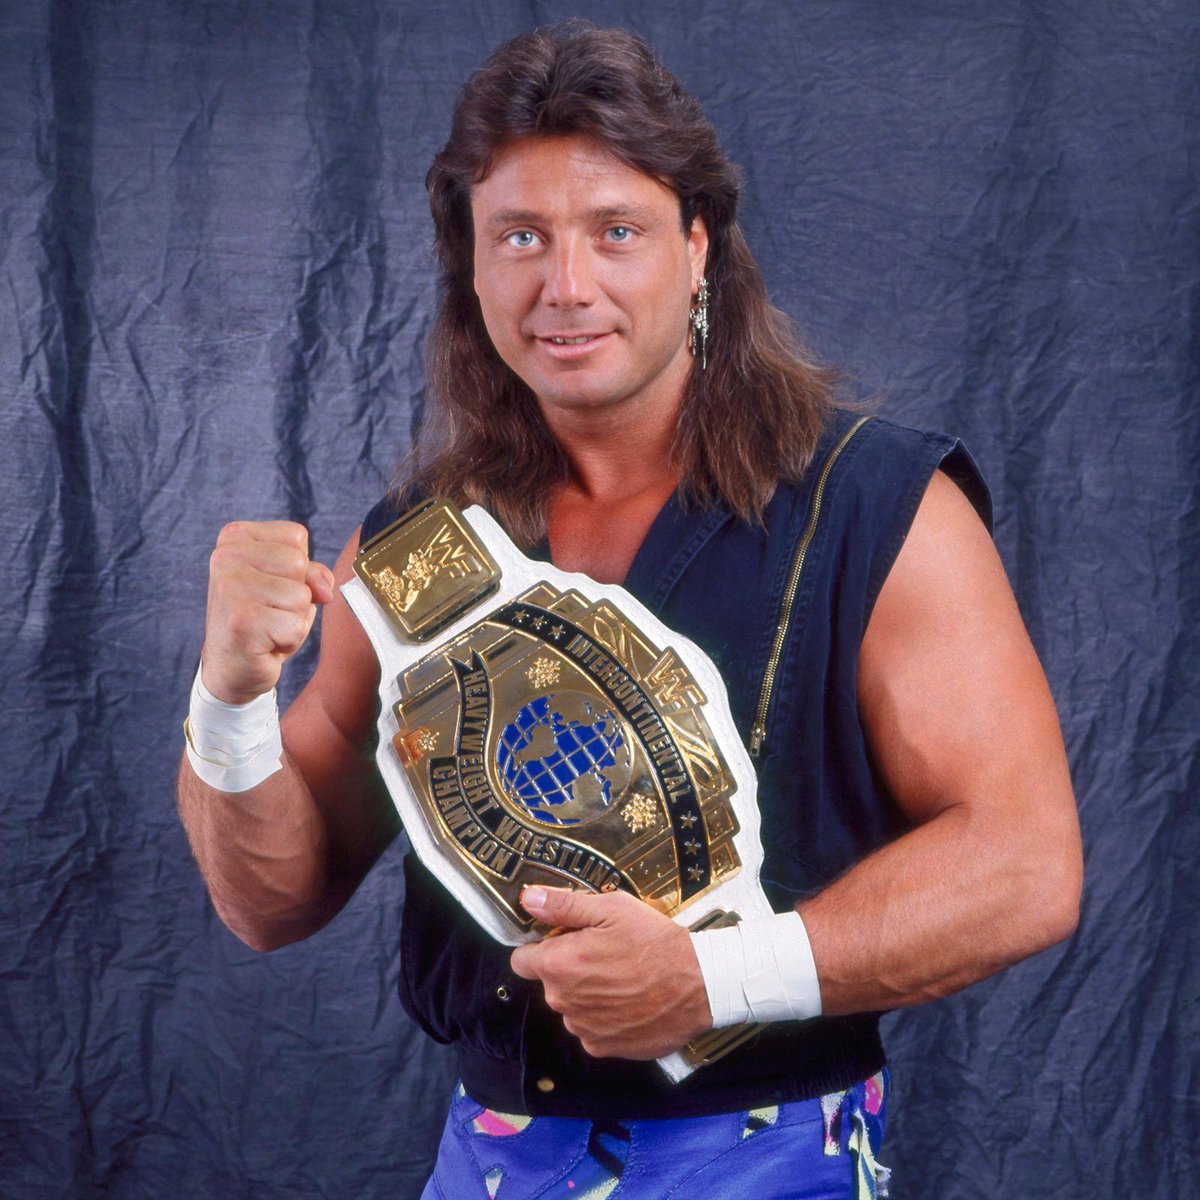 Intercontinental Champion of the day: Marty Jannetty - Captured the title on May 17, 1993. His title run lasted 20 days. 🏆 #WWF #WWE #Wrestling #MartyJannetty